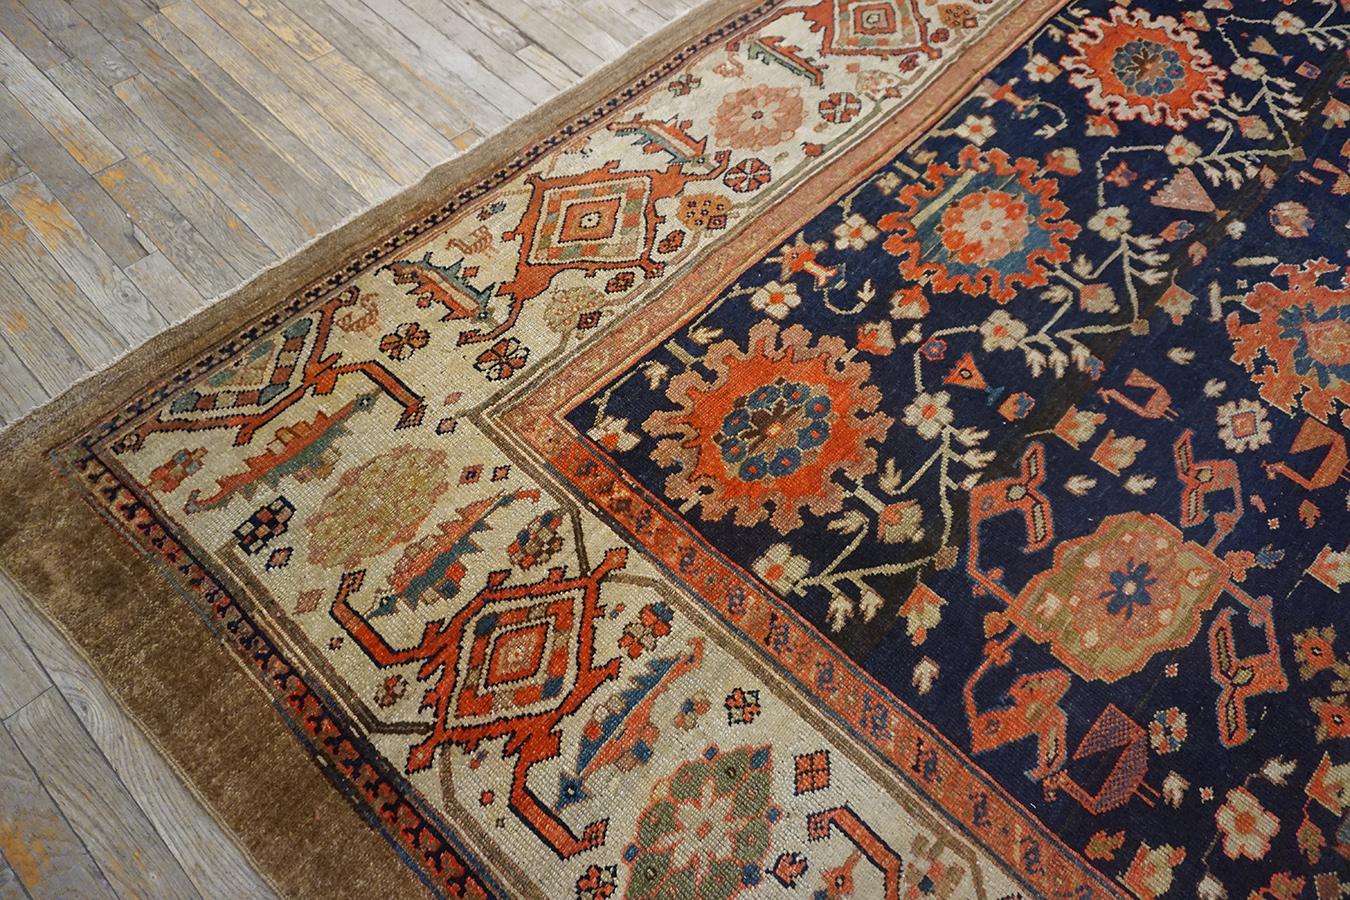 Late 19th Century 19th Century Persian Bibikabad Carpet with Harshang Pattern ( 10'7